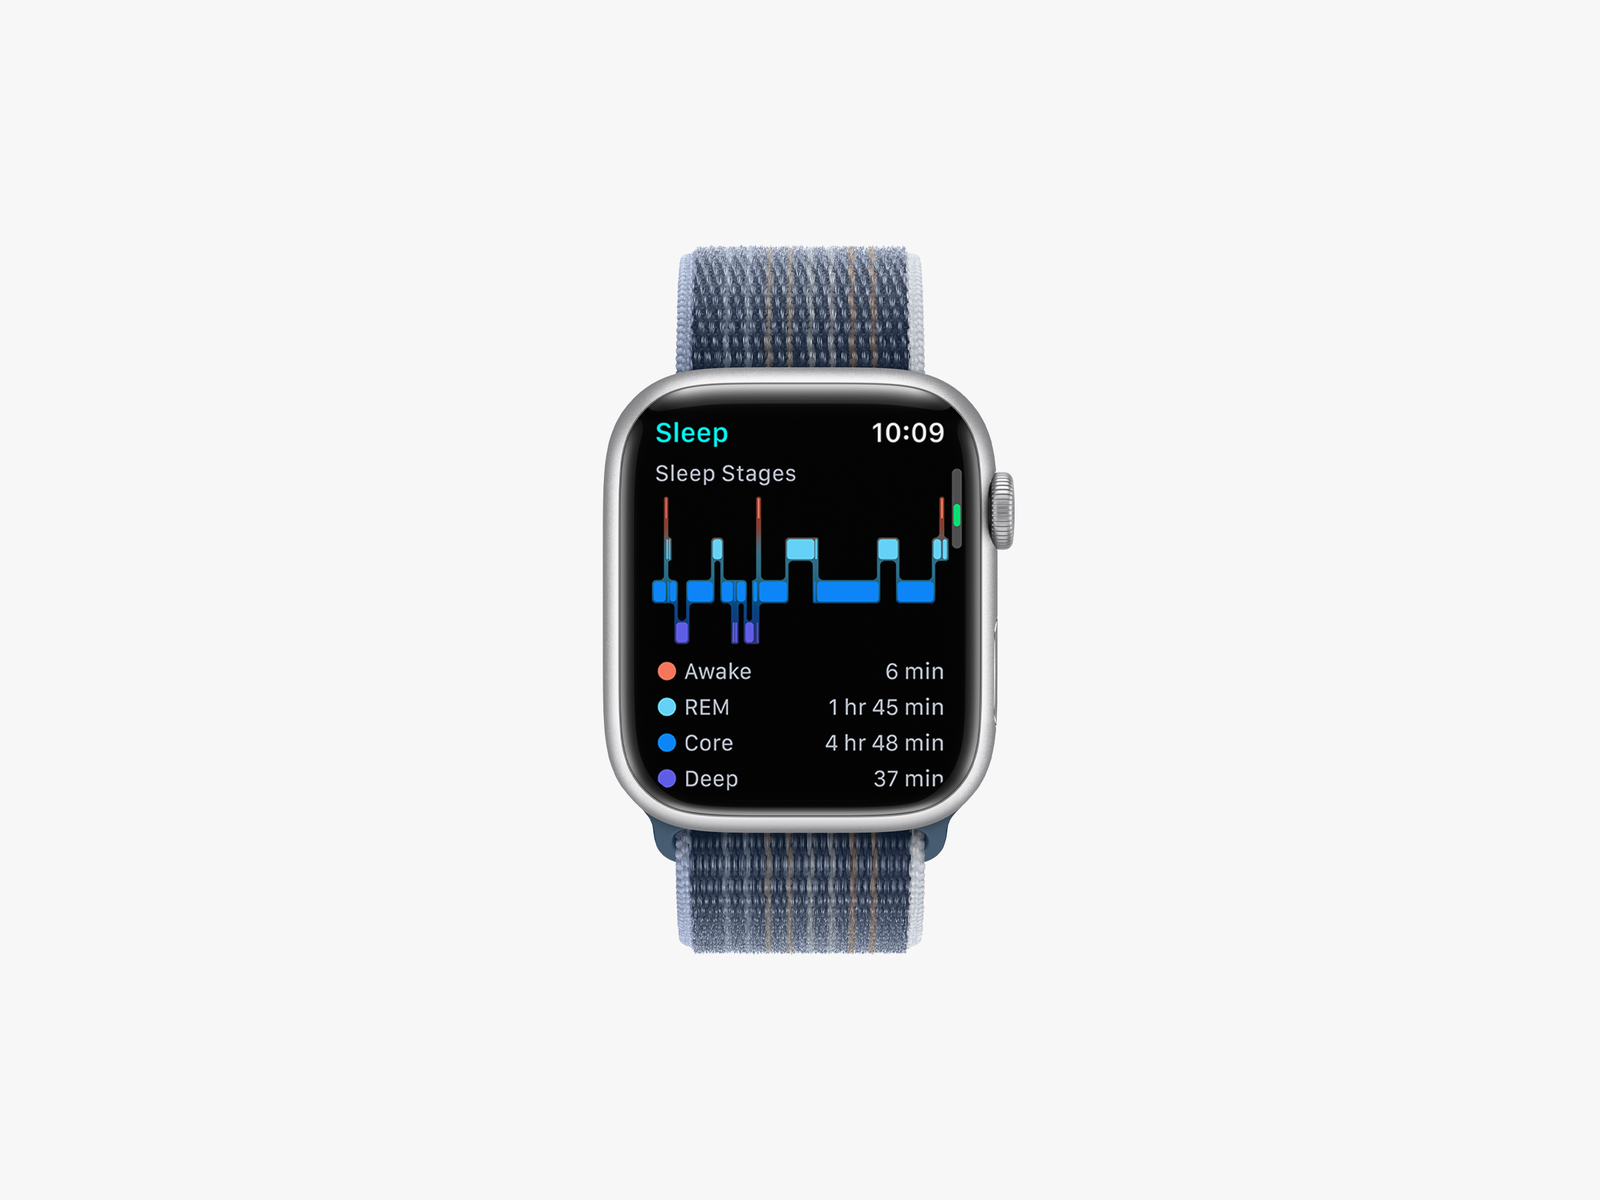 Apple Watch showing sleep stages feature